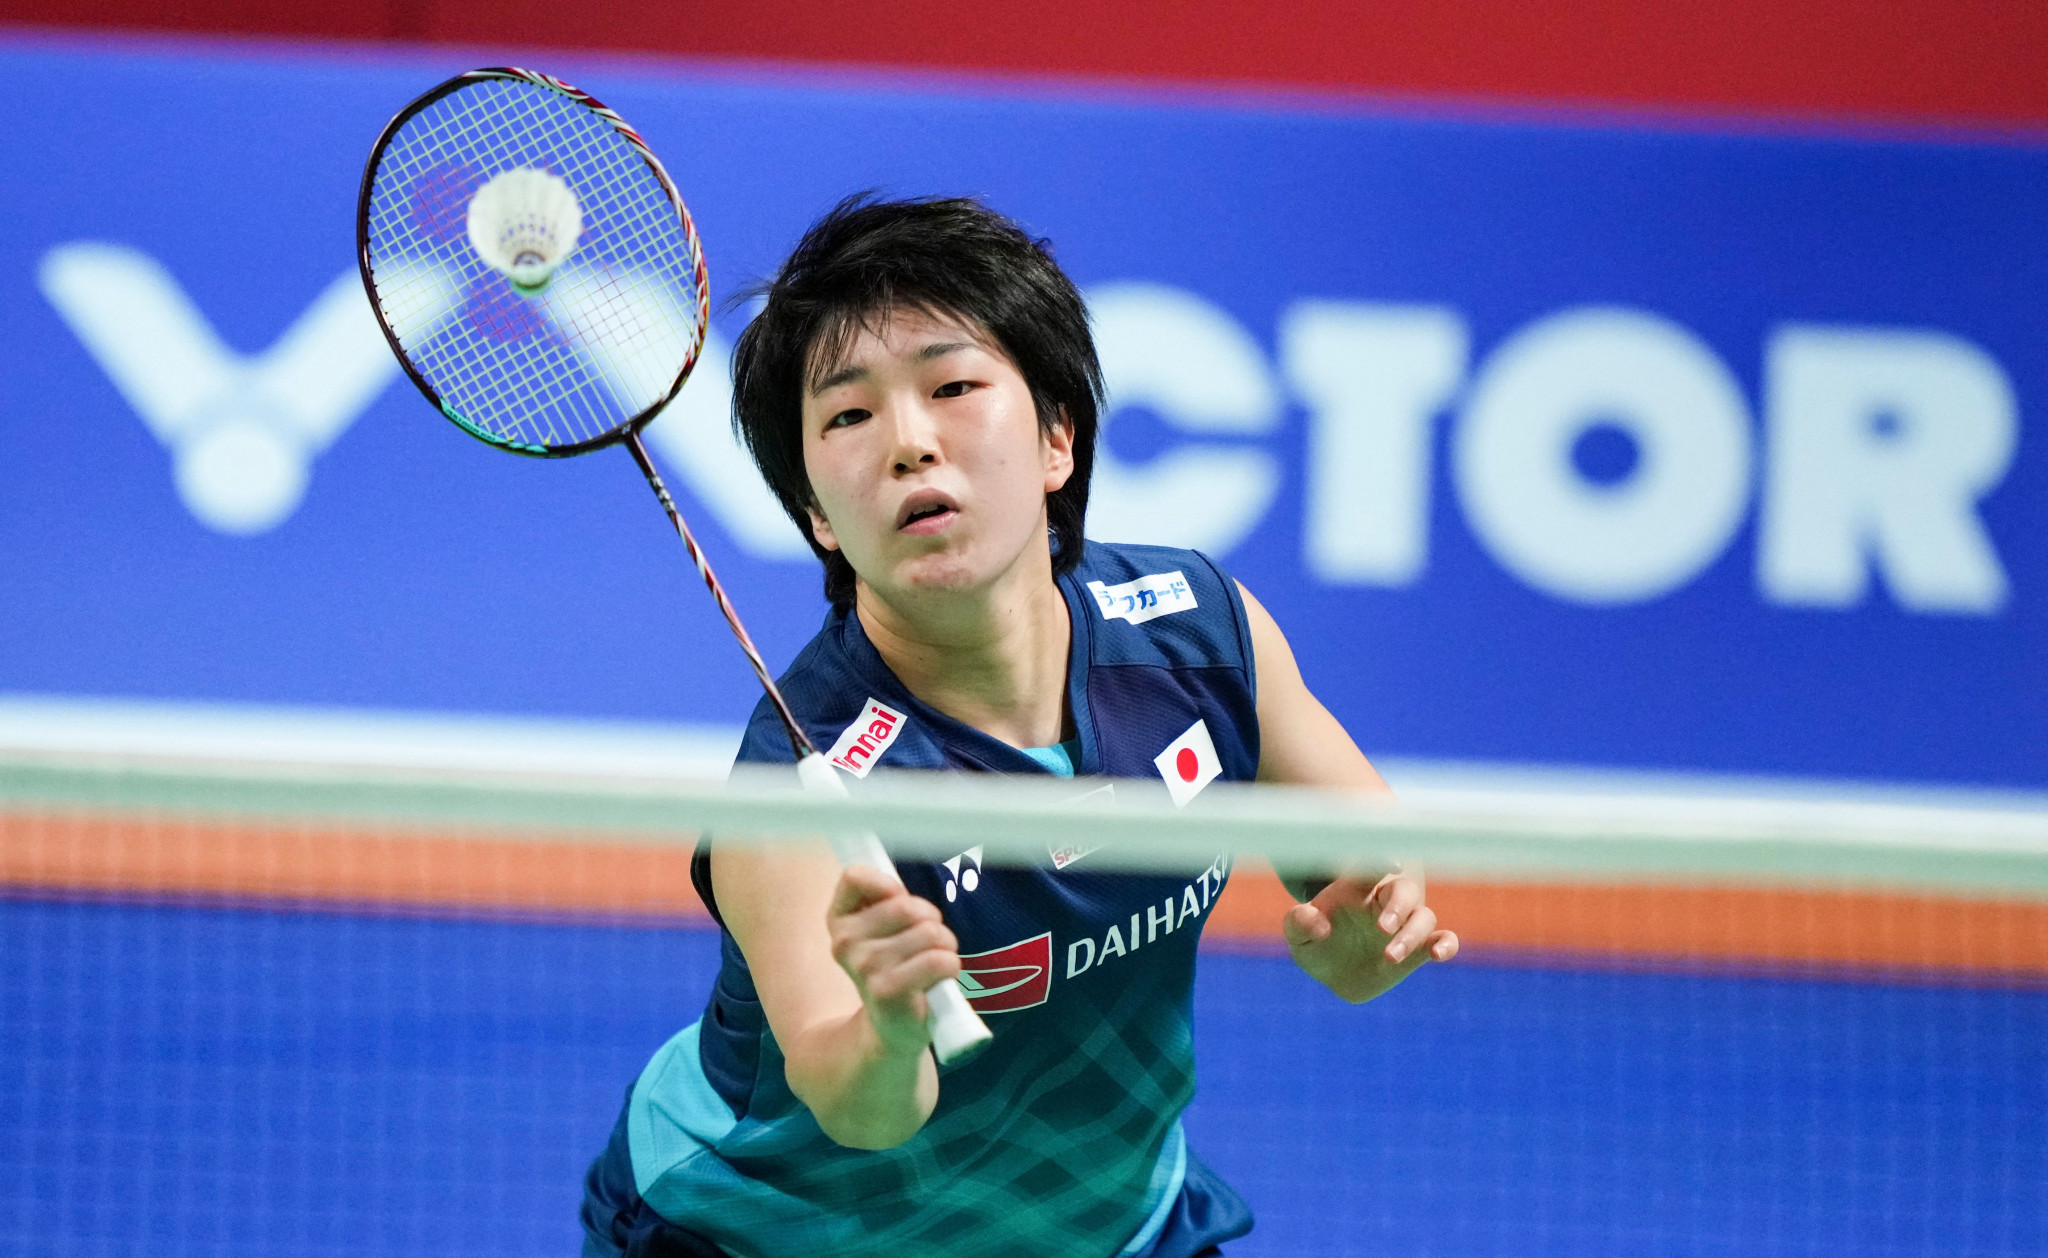 Akane Yamaguchi won her opening match in the women's singles tournament ©Getty Images